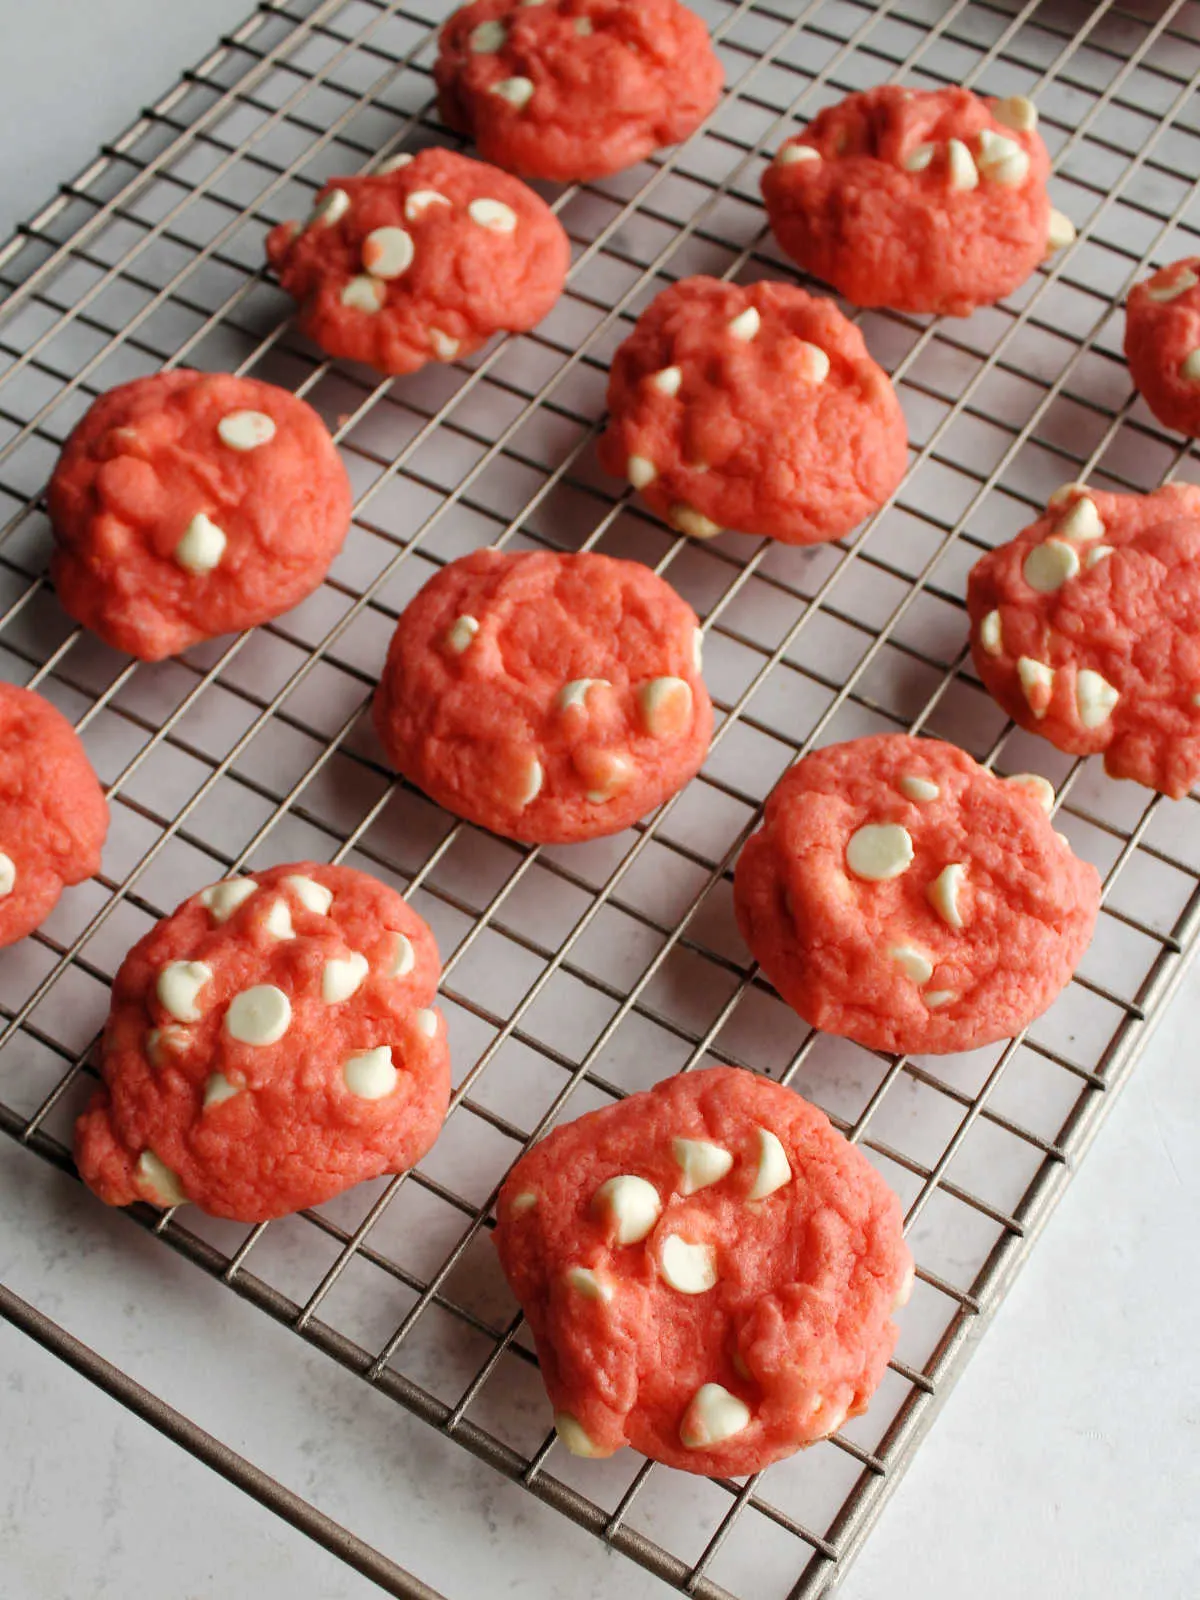 Pink strawberry cookies cooling on wire rack.